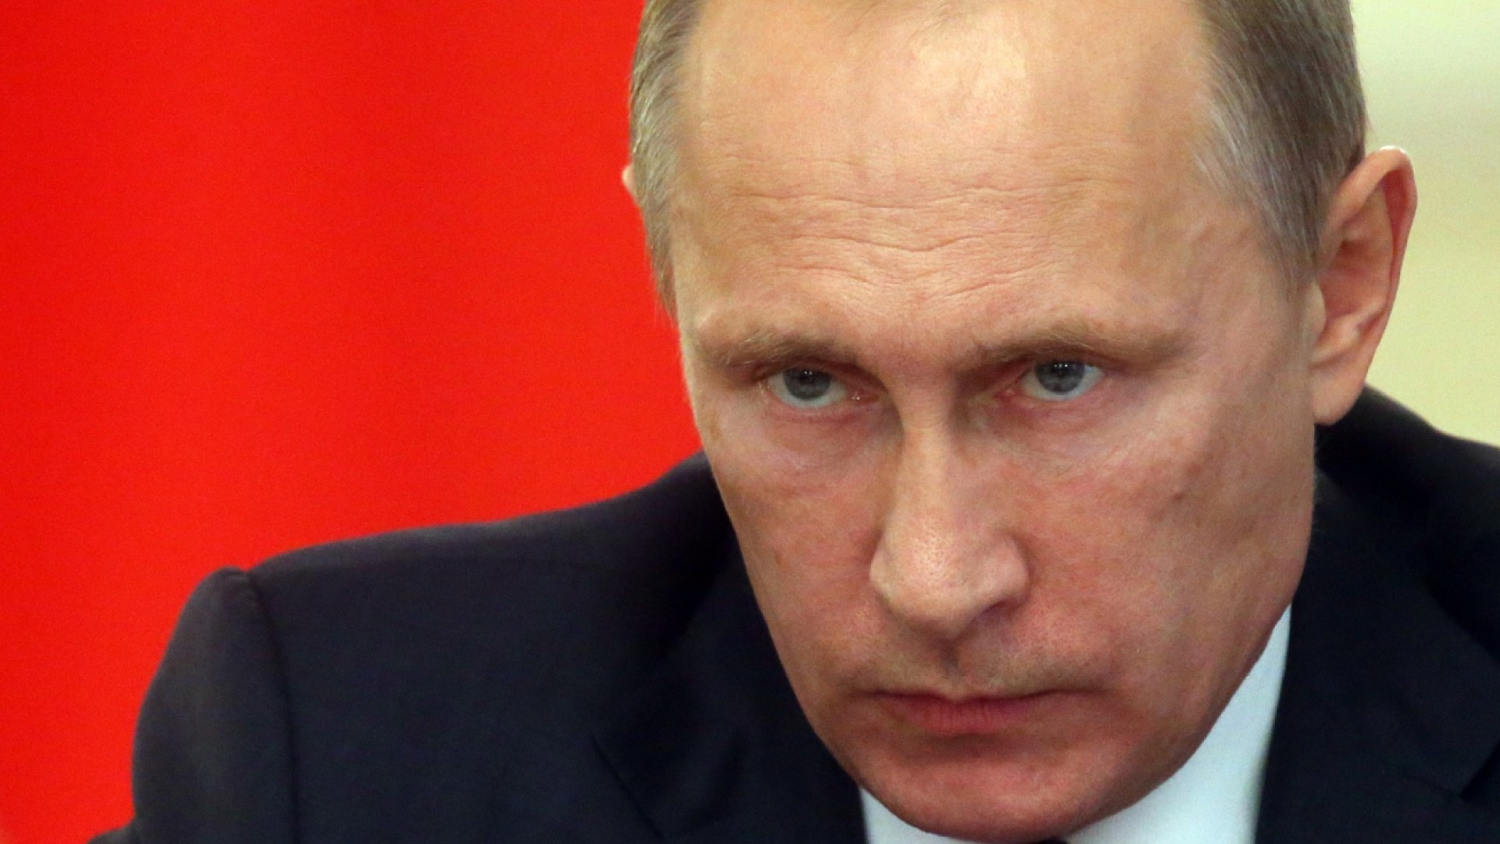 Putin appoints economist as defense minister amid concerns about weapons & resources